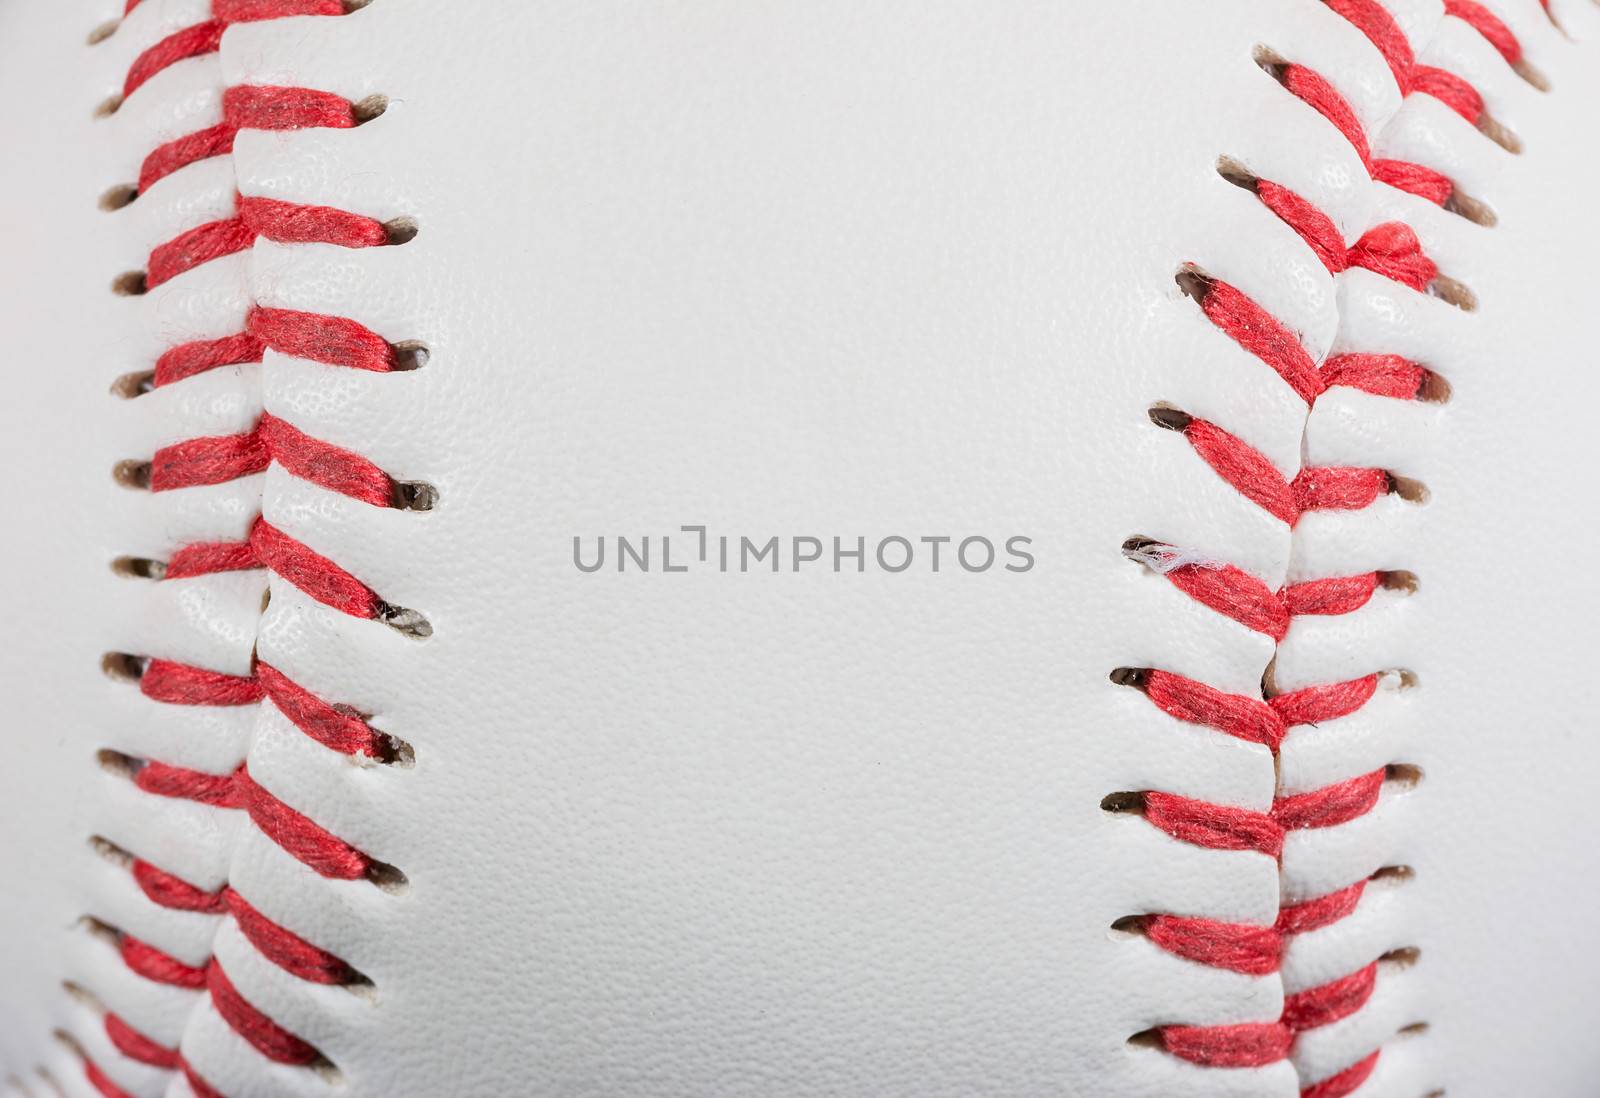 Baseball Ball macro on Stitches suitable as framed background for title text, horizontal shot